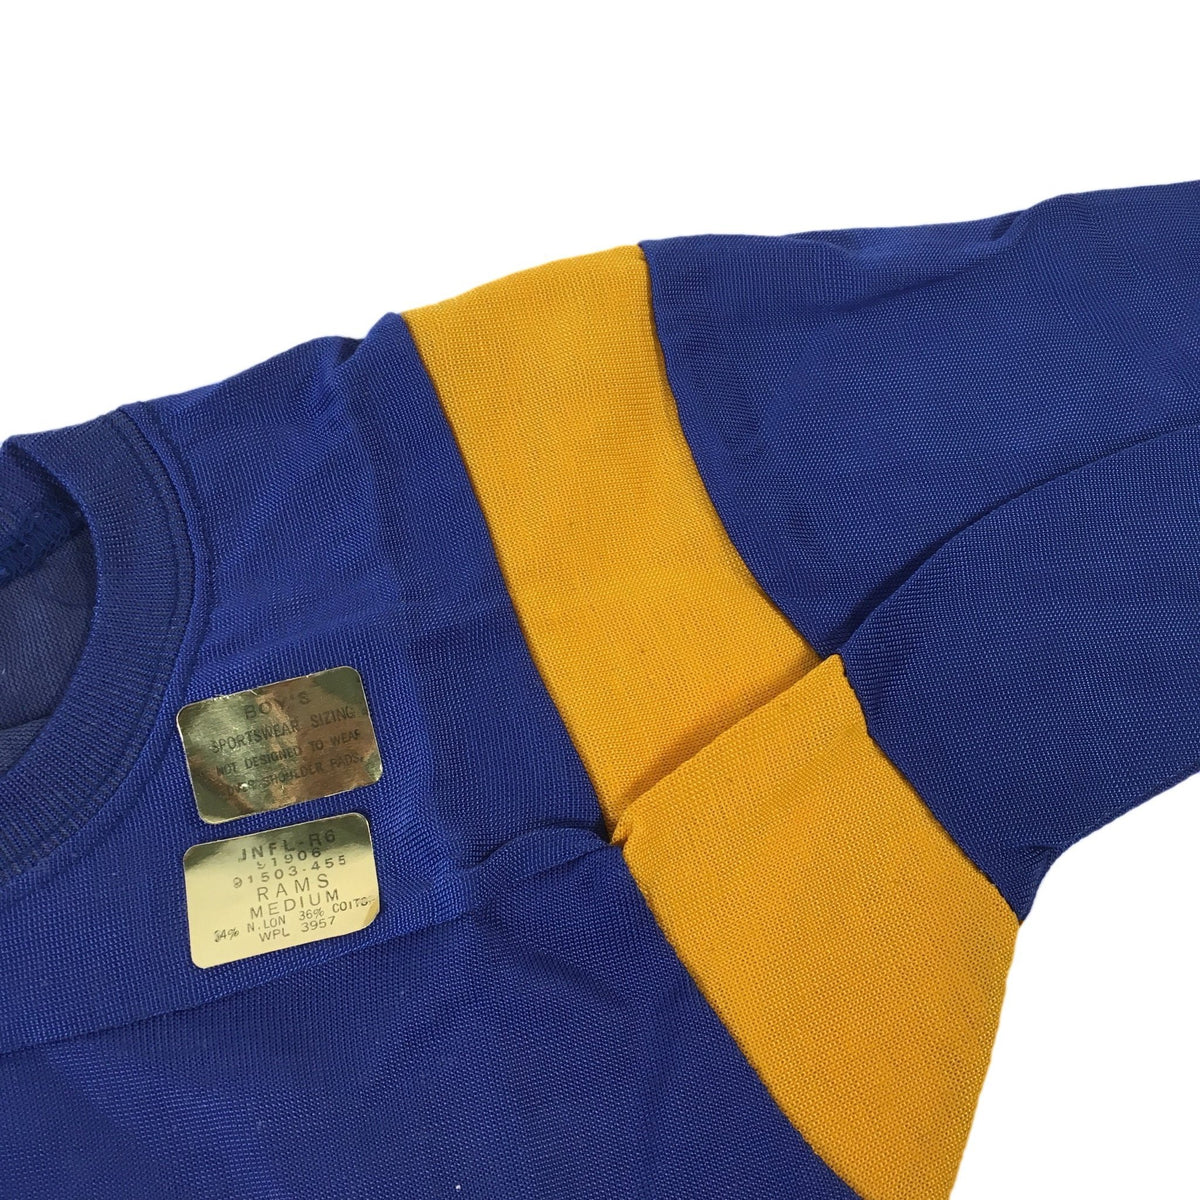 Vintage Rawlings &quot;Los Angeles Rams&quot; Jersey - jointcustodydc